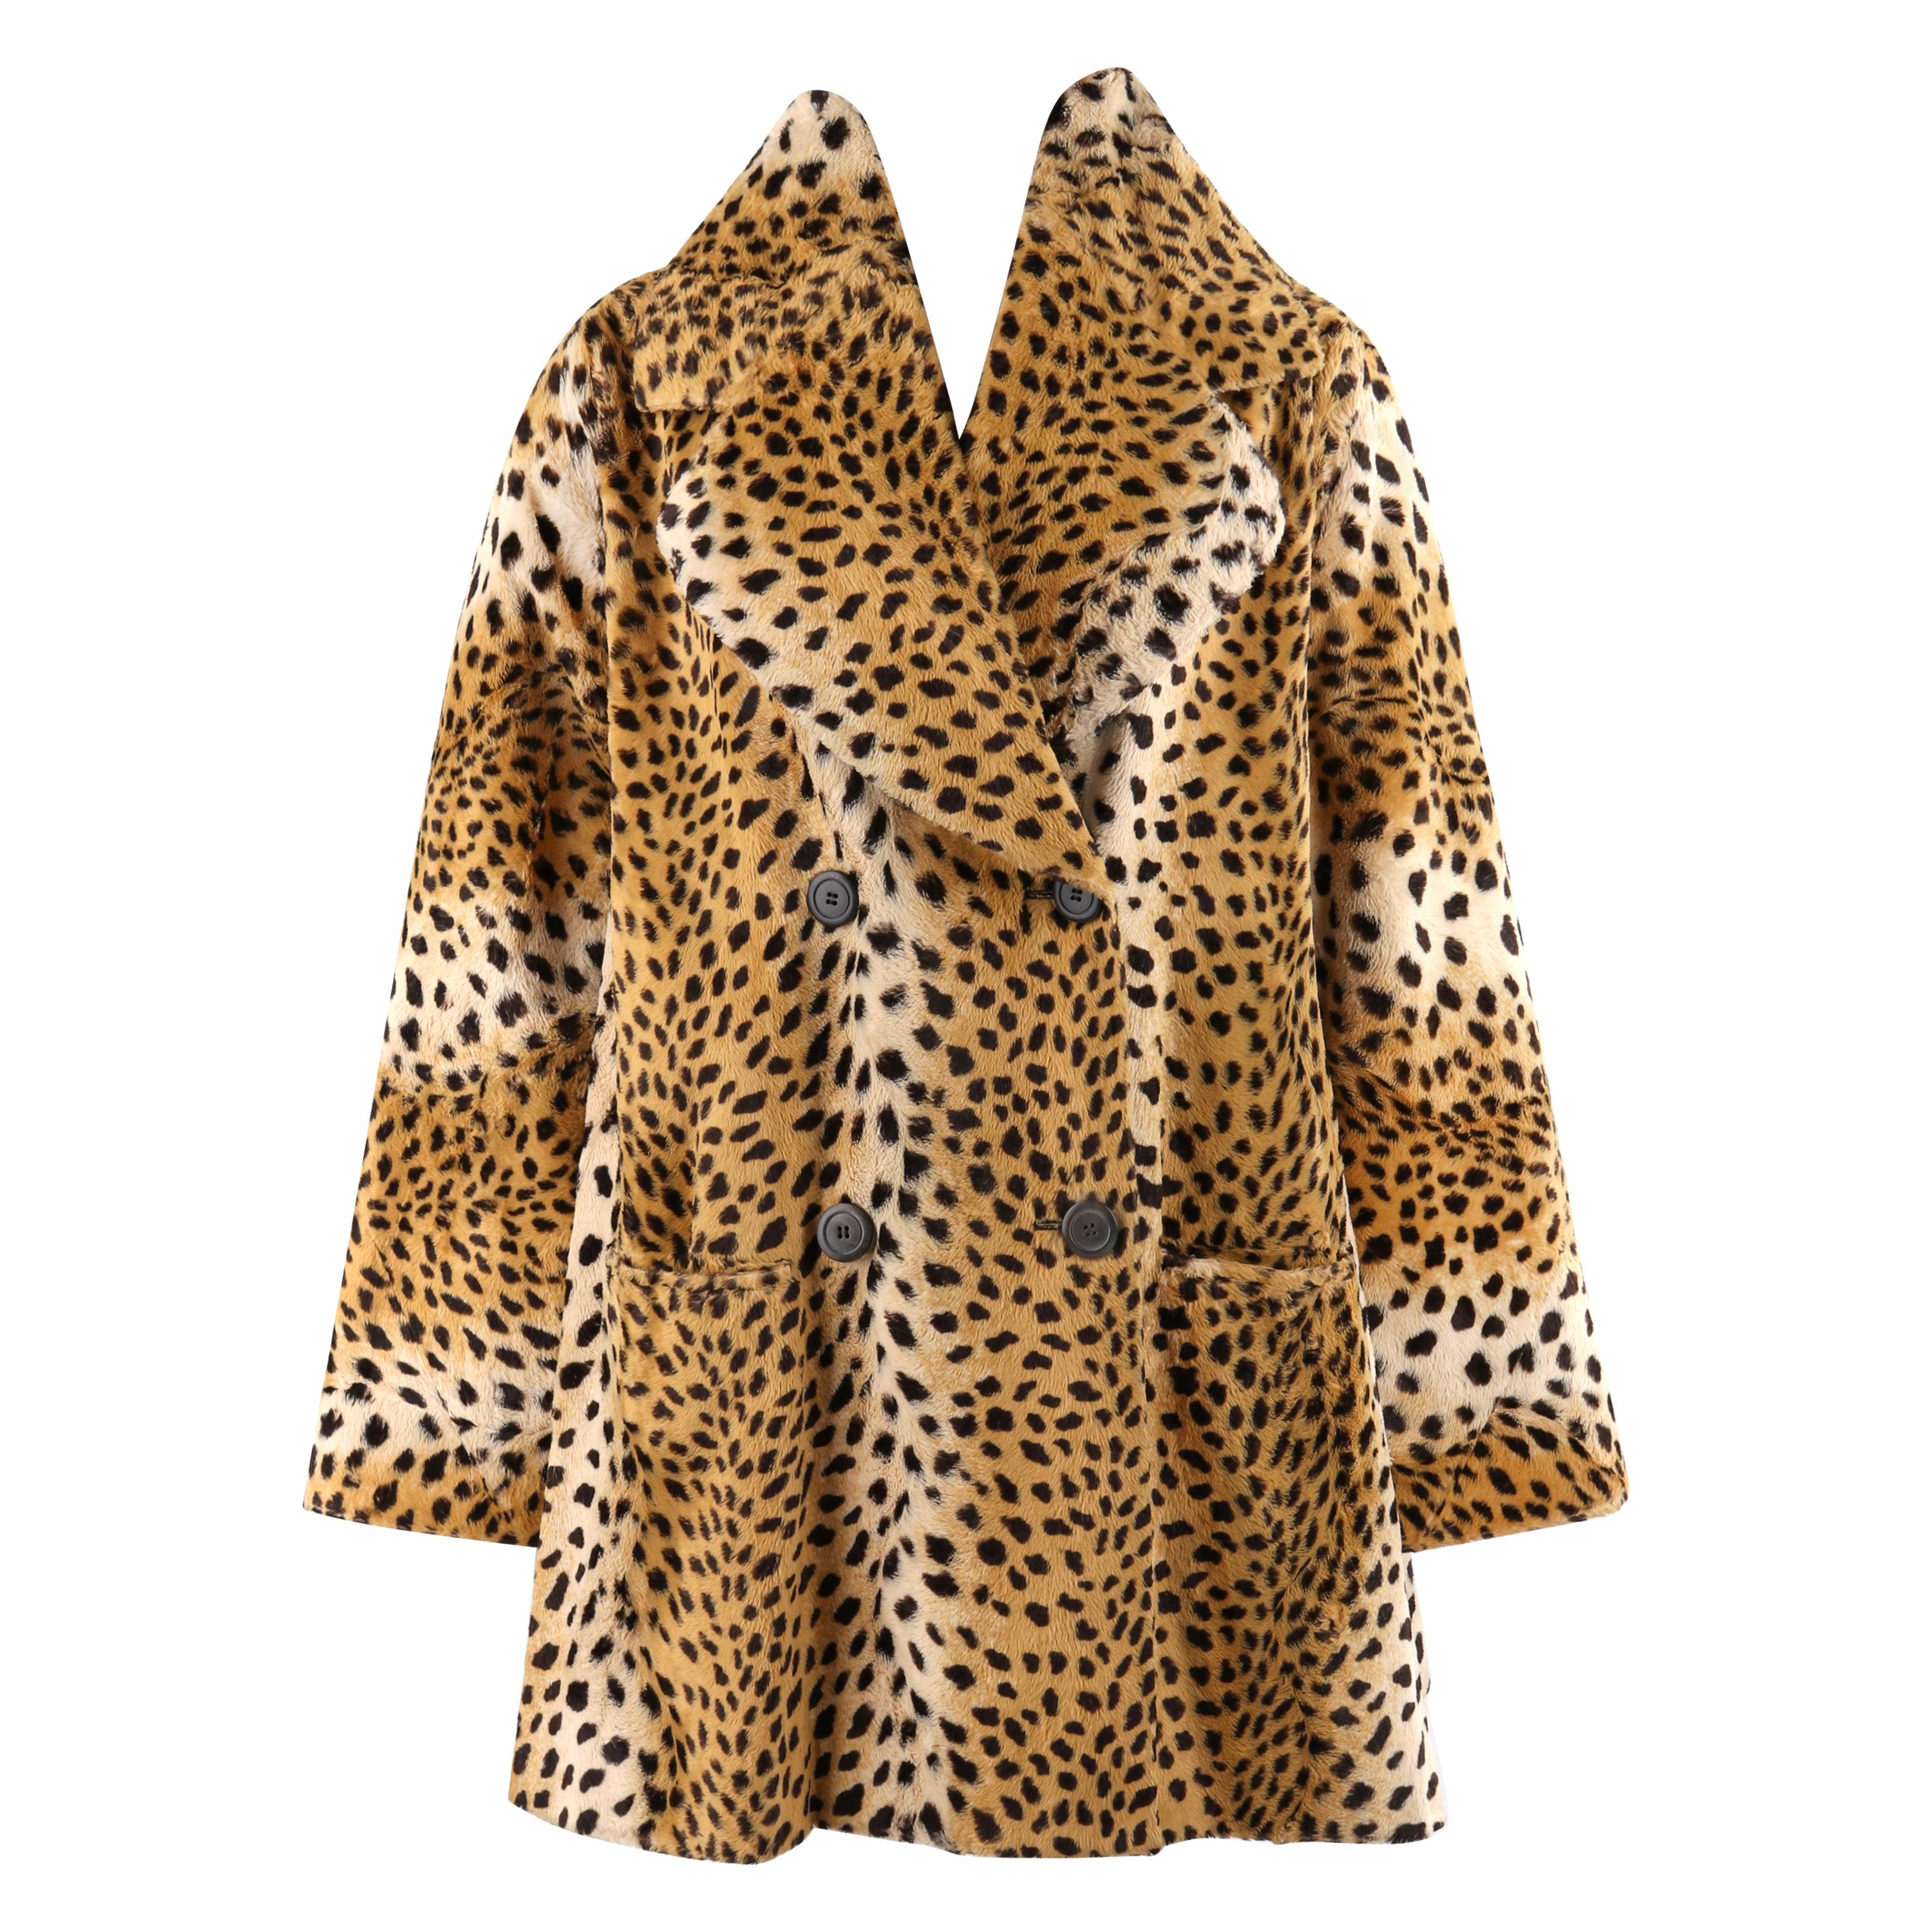 GIVENCHY COUTURE A/W 1997 ALEXANDER McQUEEN Cheetah Print Faux Fur Paneled Coat